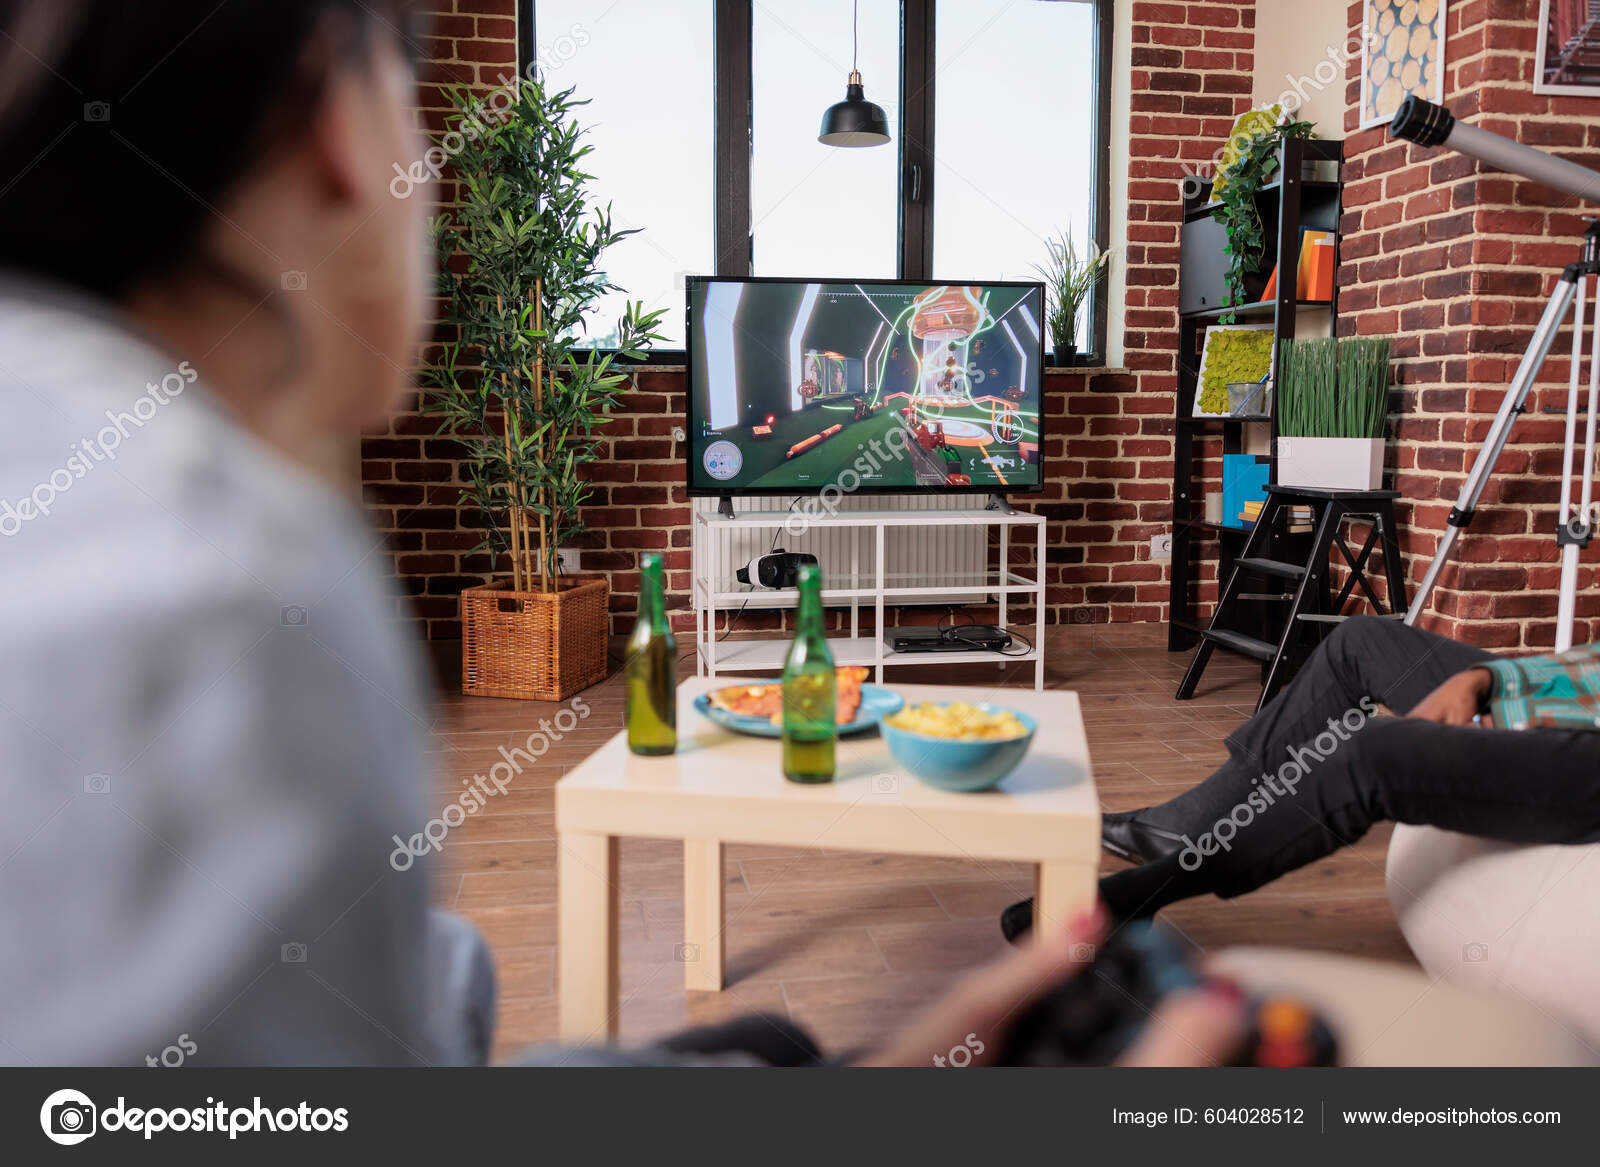 Young Adult Playing Shooting Video Games Strategy Home Having Fun Stock Photo by ©DragosCondreaW 604028512